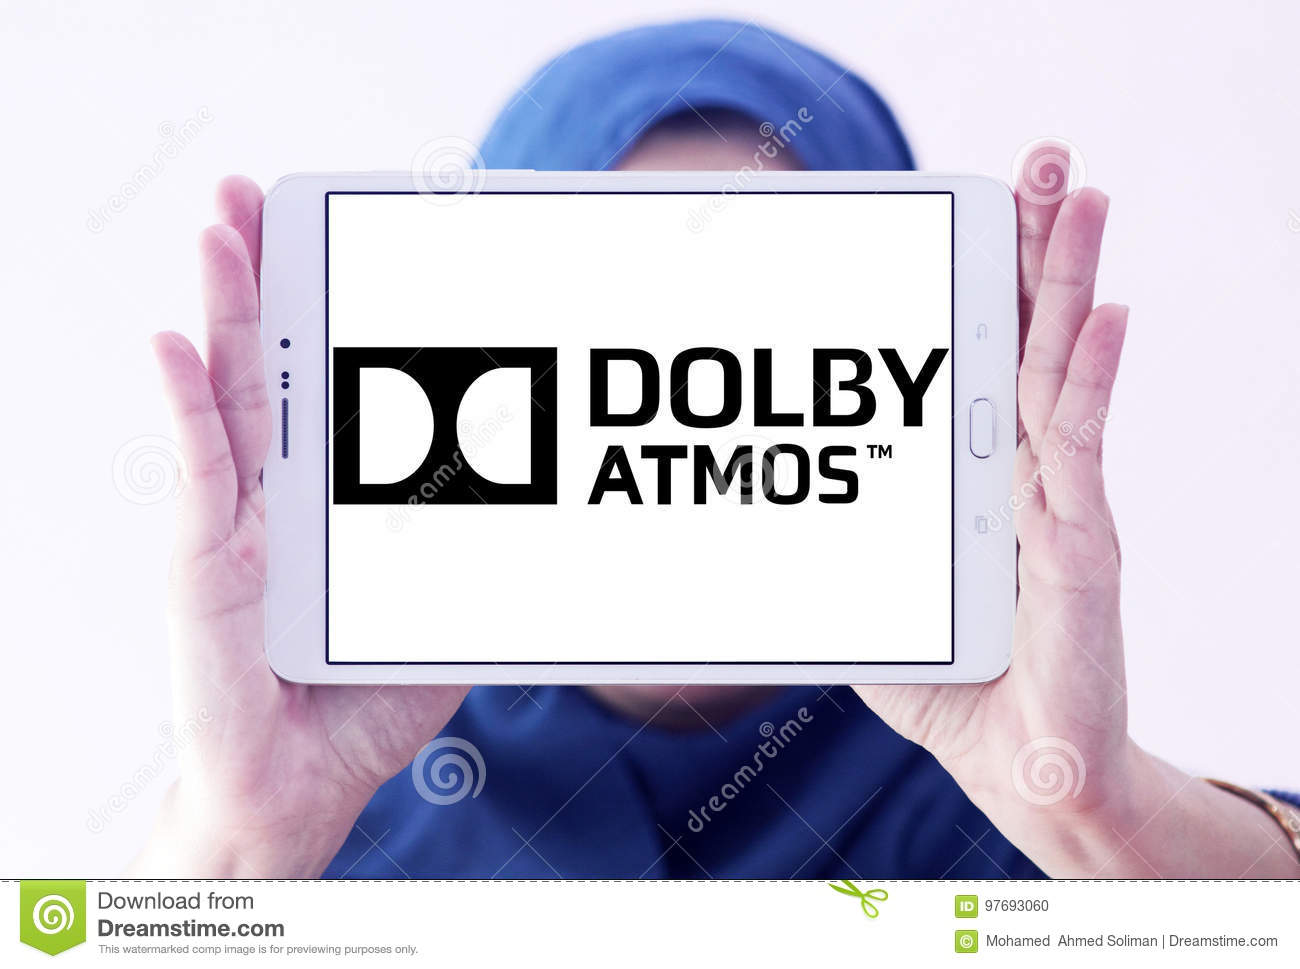 dolby atmos demo disc torrent